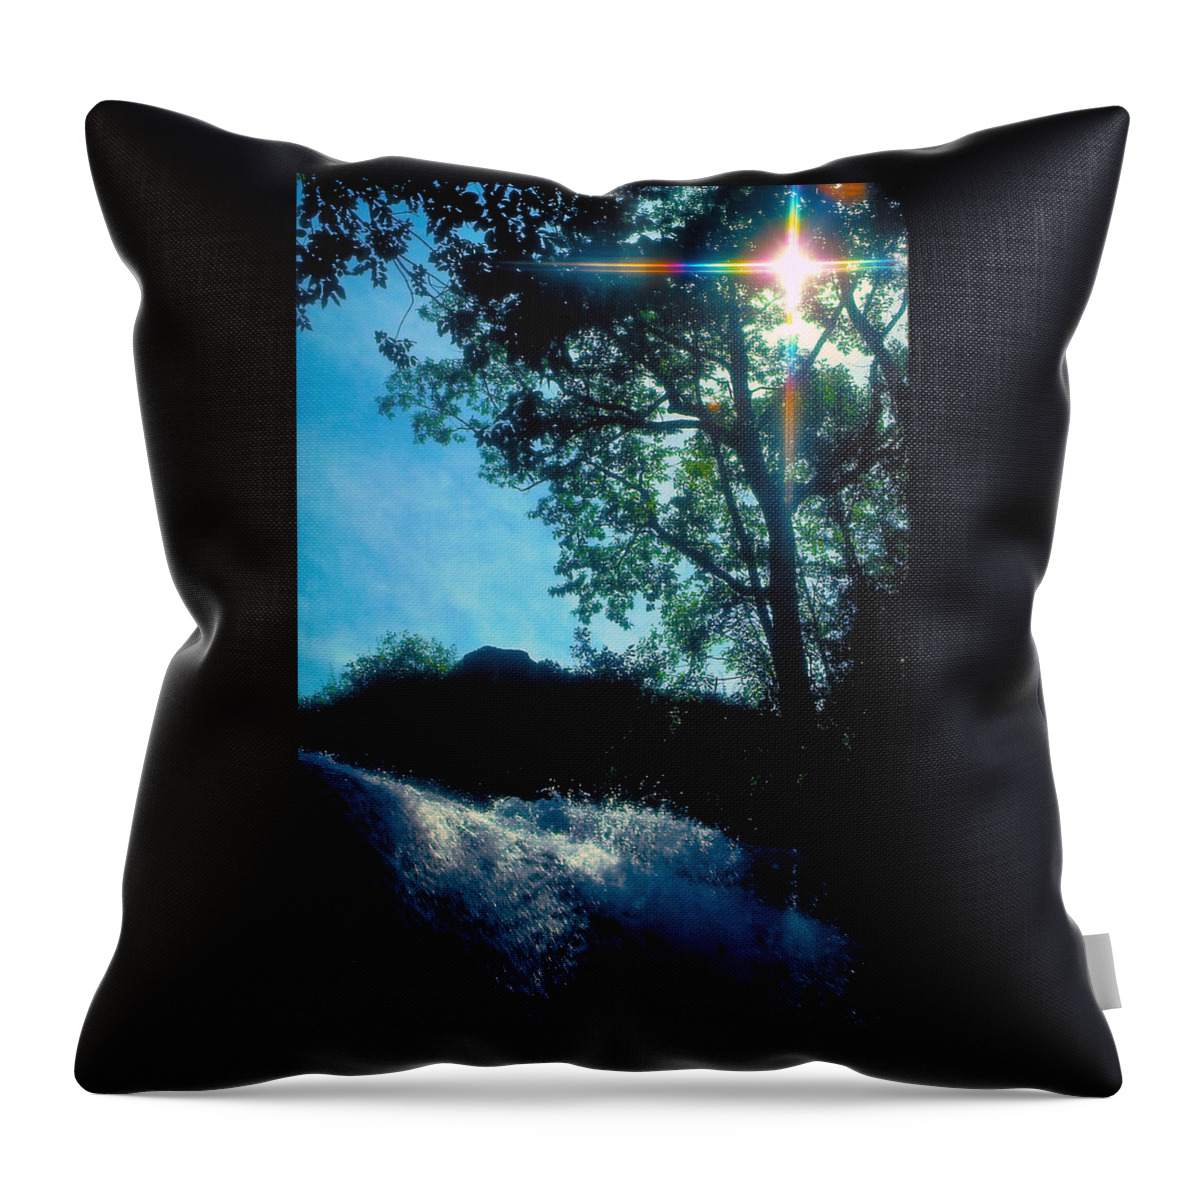 Waterfall Throw Pillow featuring the photograph Tree Planted by Streams of Water by Marie Hicks